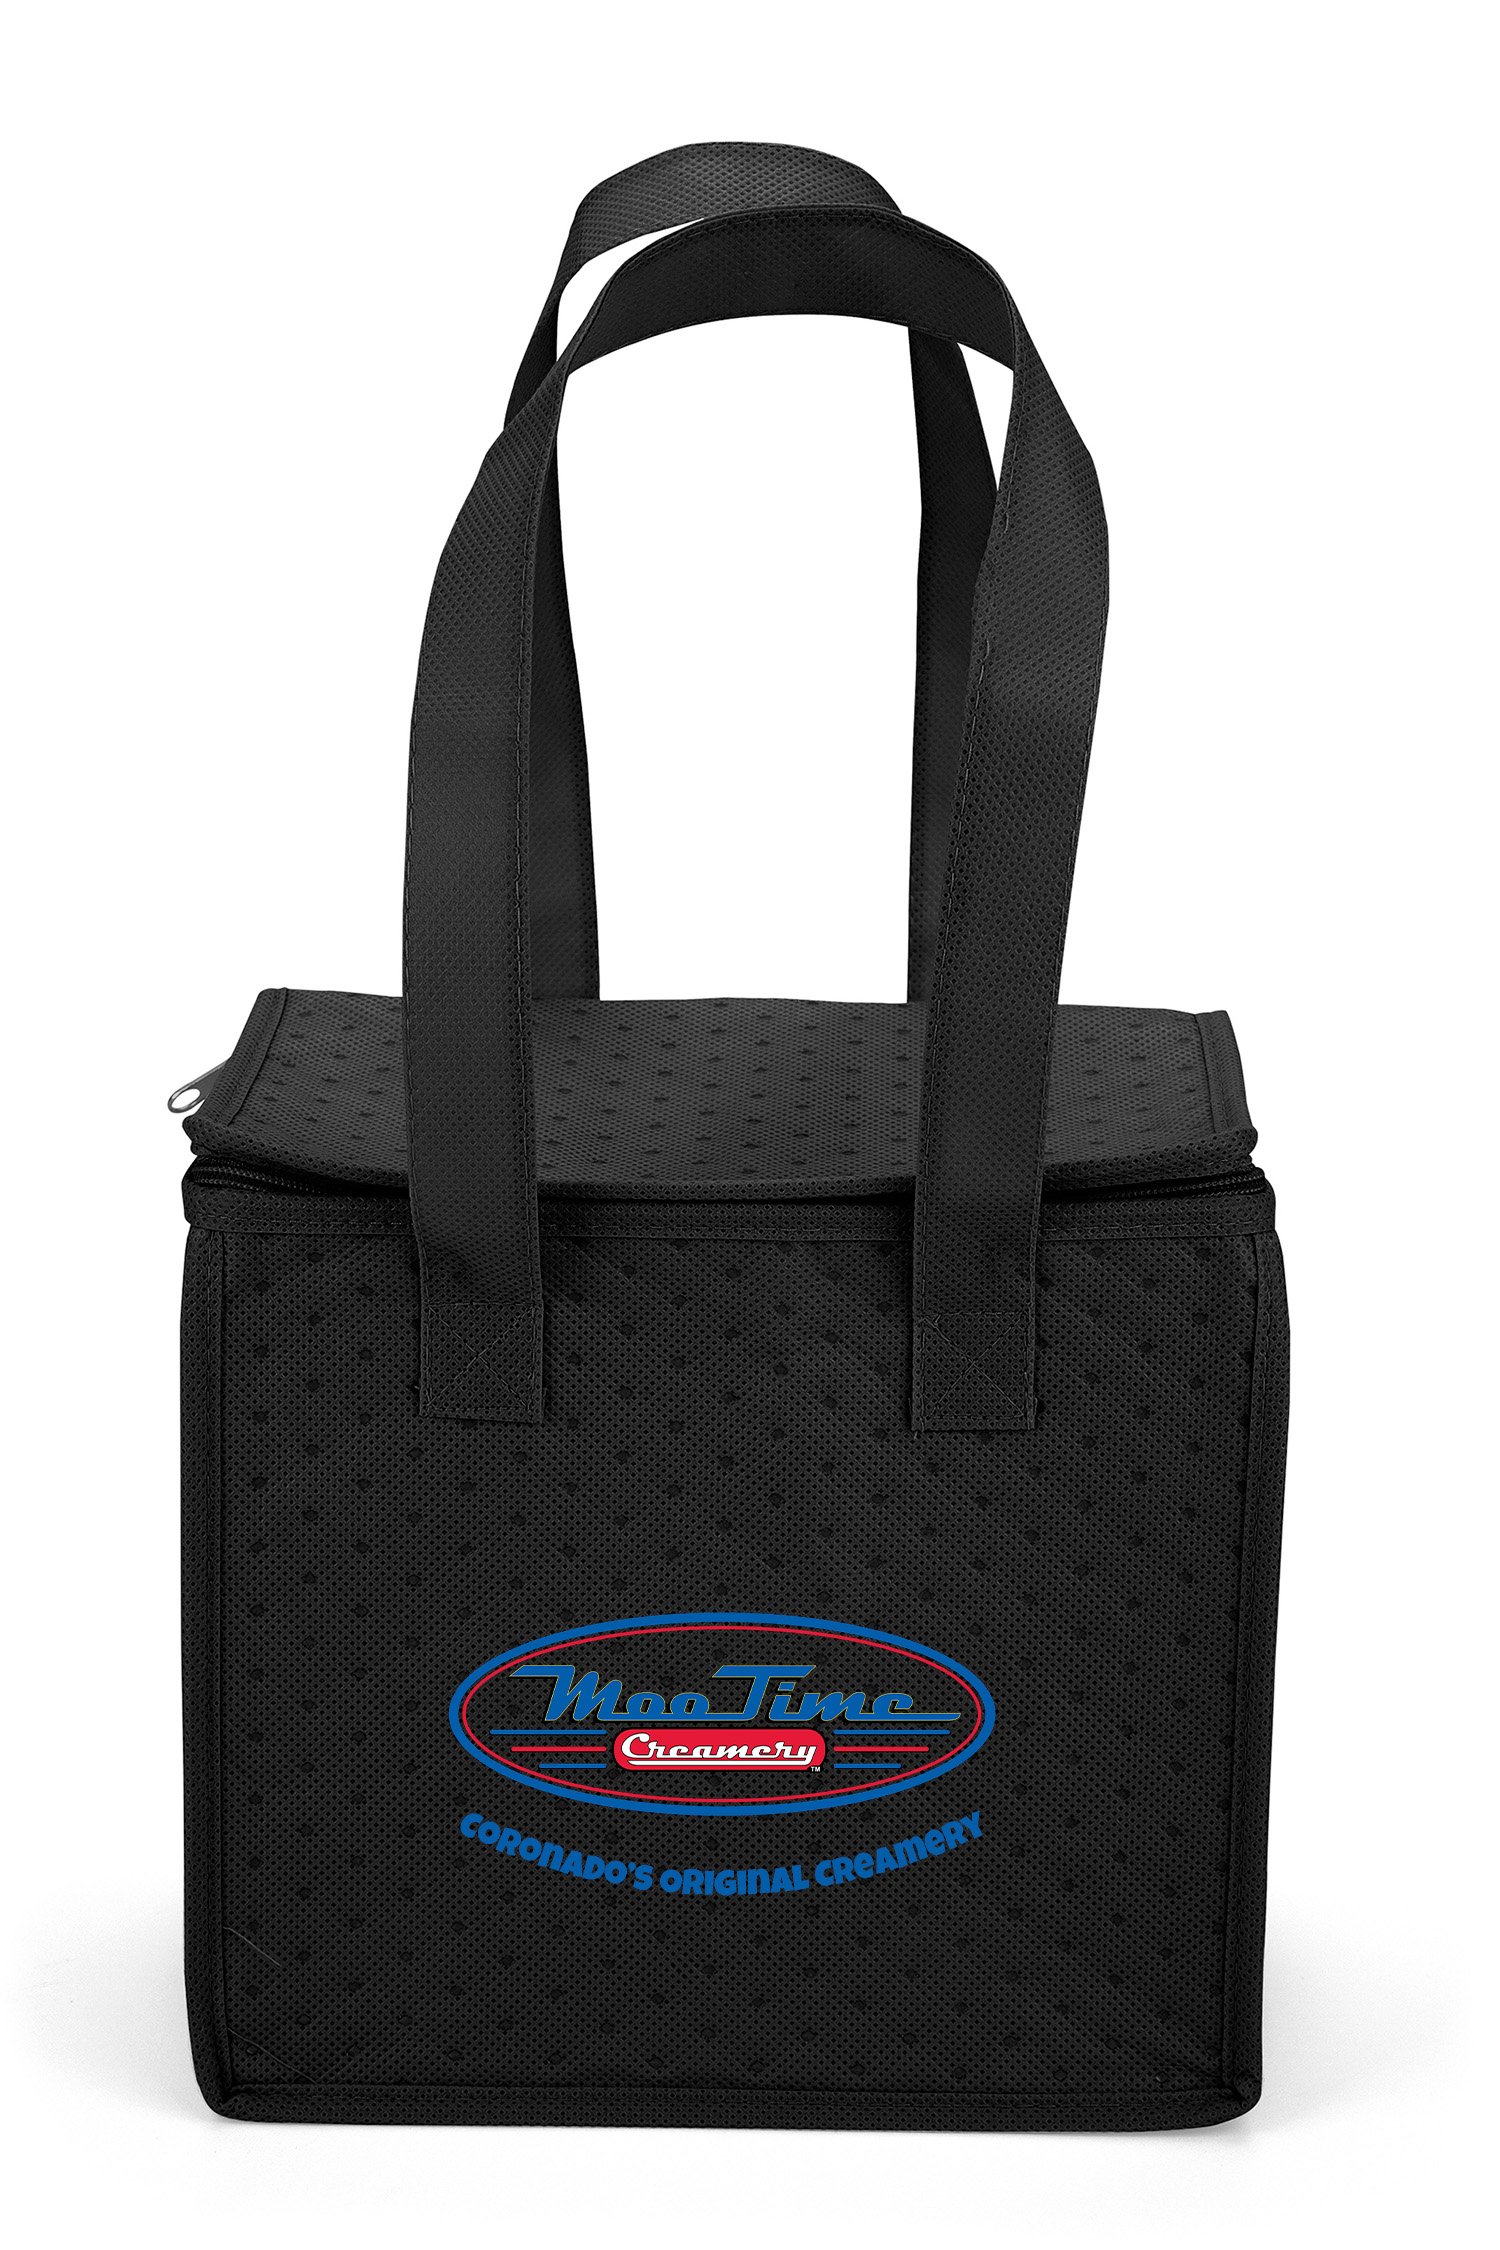 Bag Makers CVAC98 - Custom Printed Eco-Friendly Insulated Promotional Non-Woven Cooler Tote